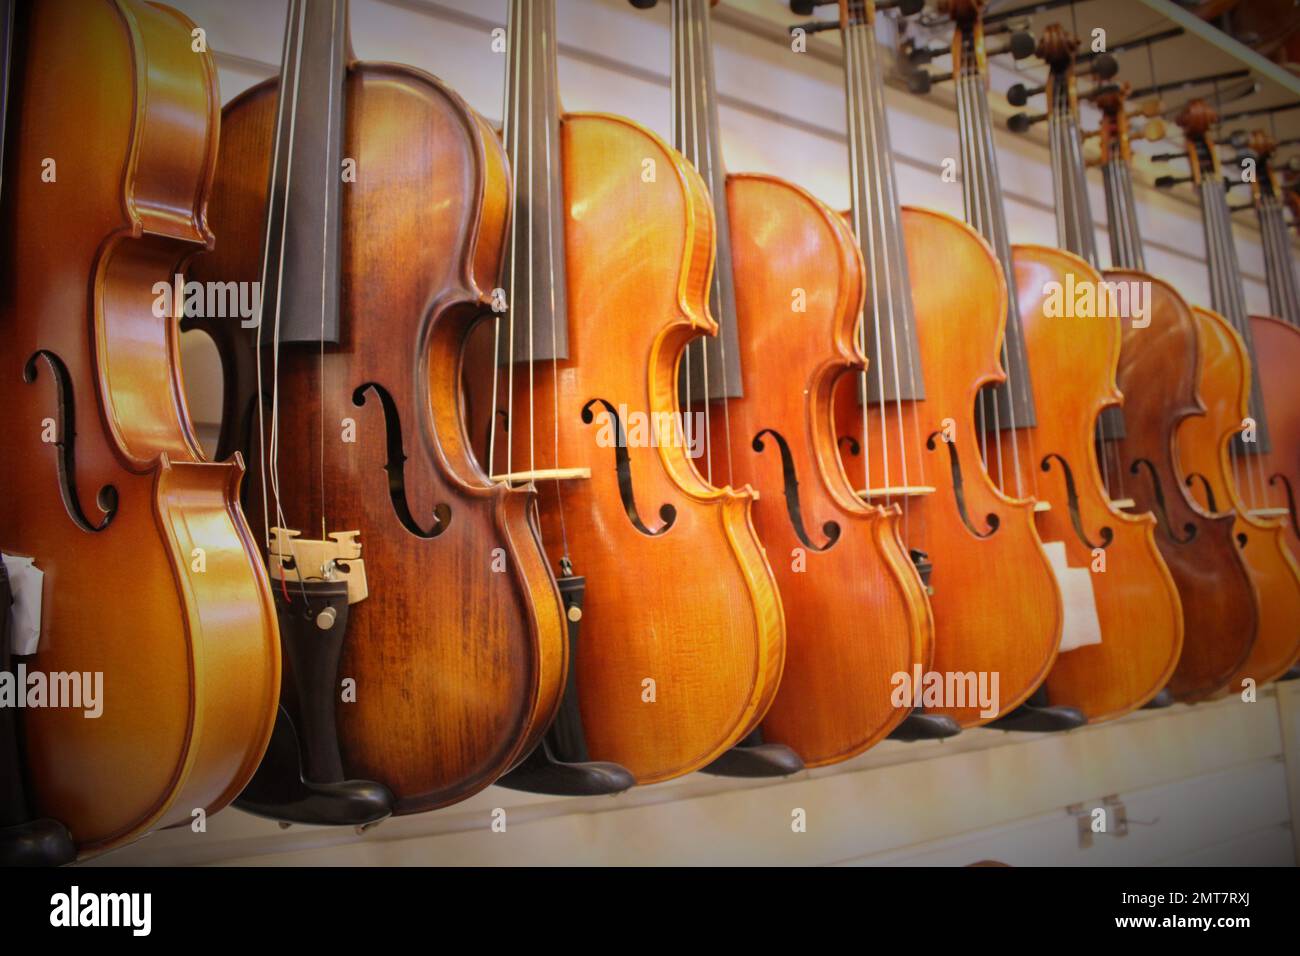 Violins on display in music store Stock Photo